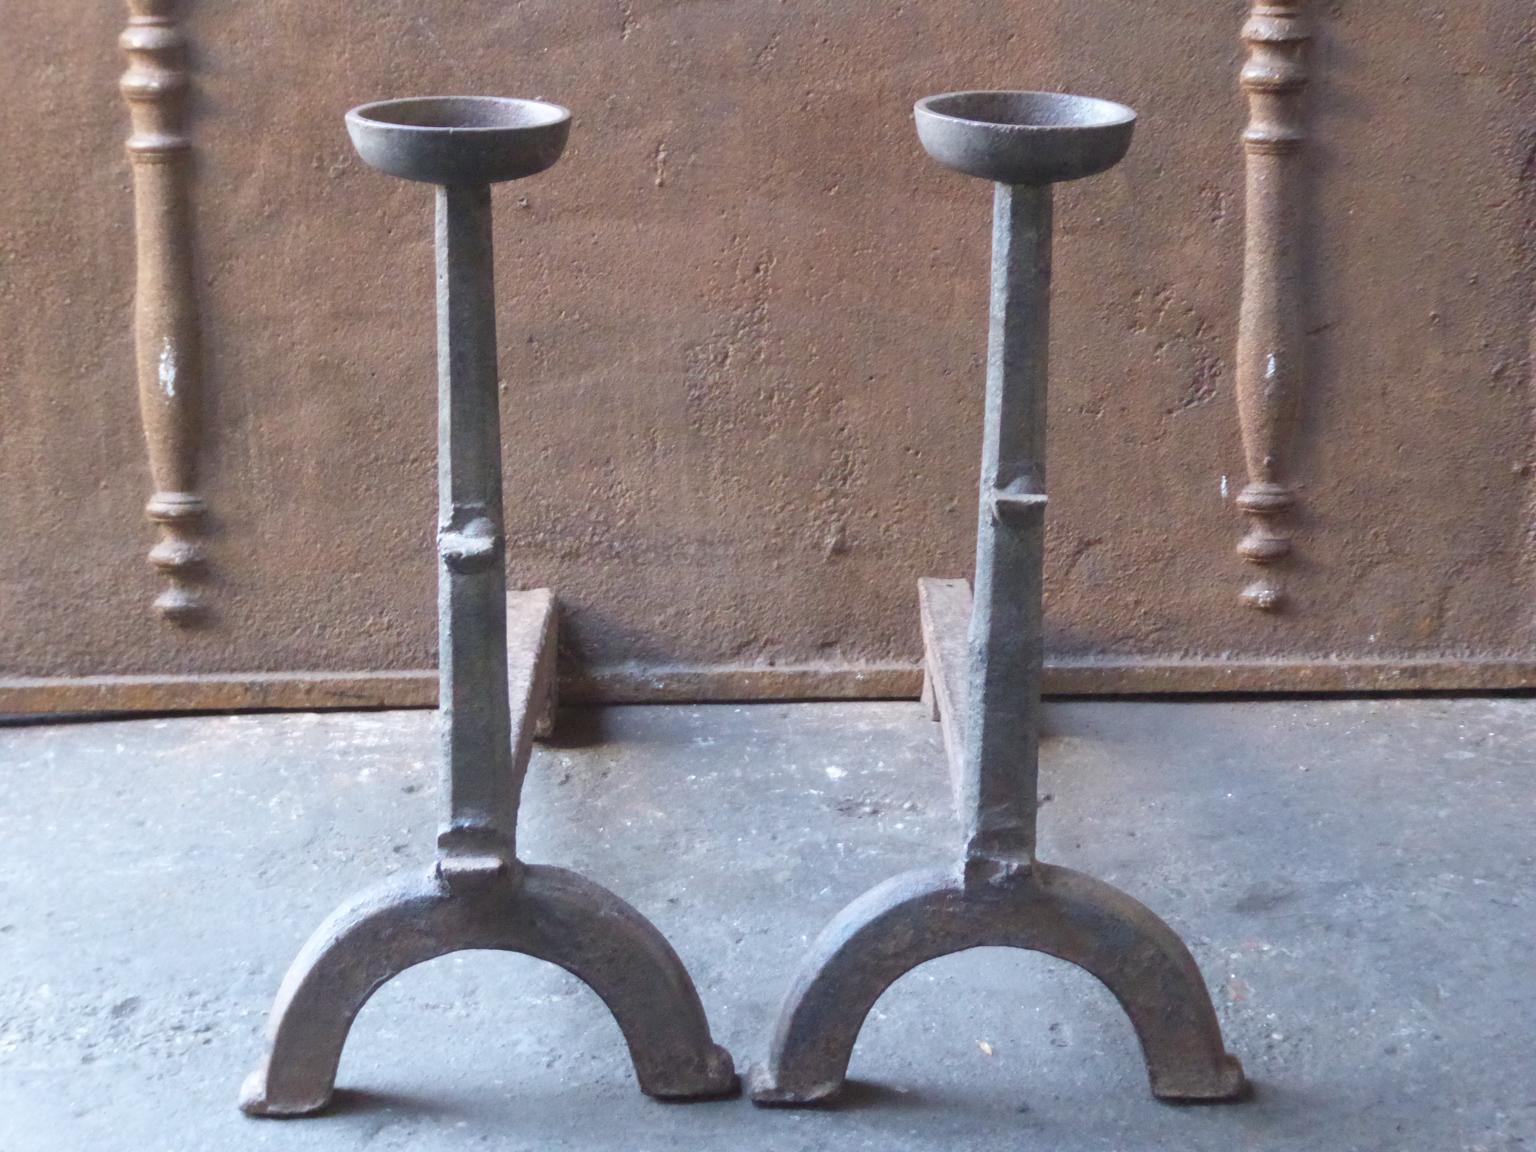 17th-18th century French andirons made of cast iron. The style of the andirons is Gothic. The andirons have spit hooks to grill food and a cup to keep drinks warm. They are in a good condition. 

These French andirons are called 'landiers' in